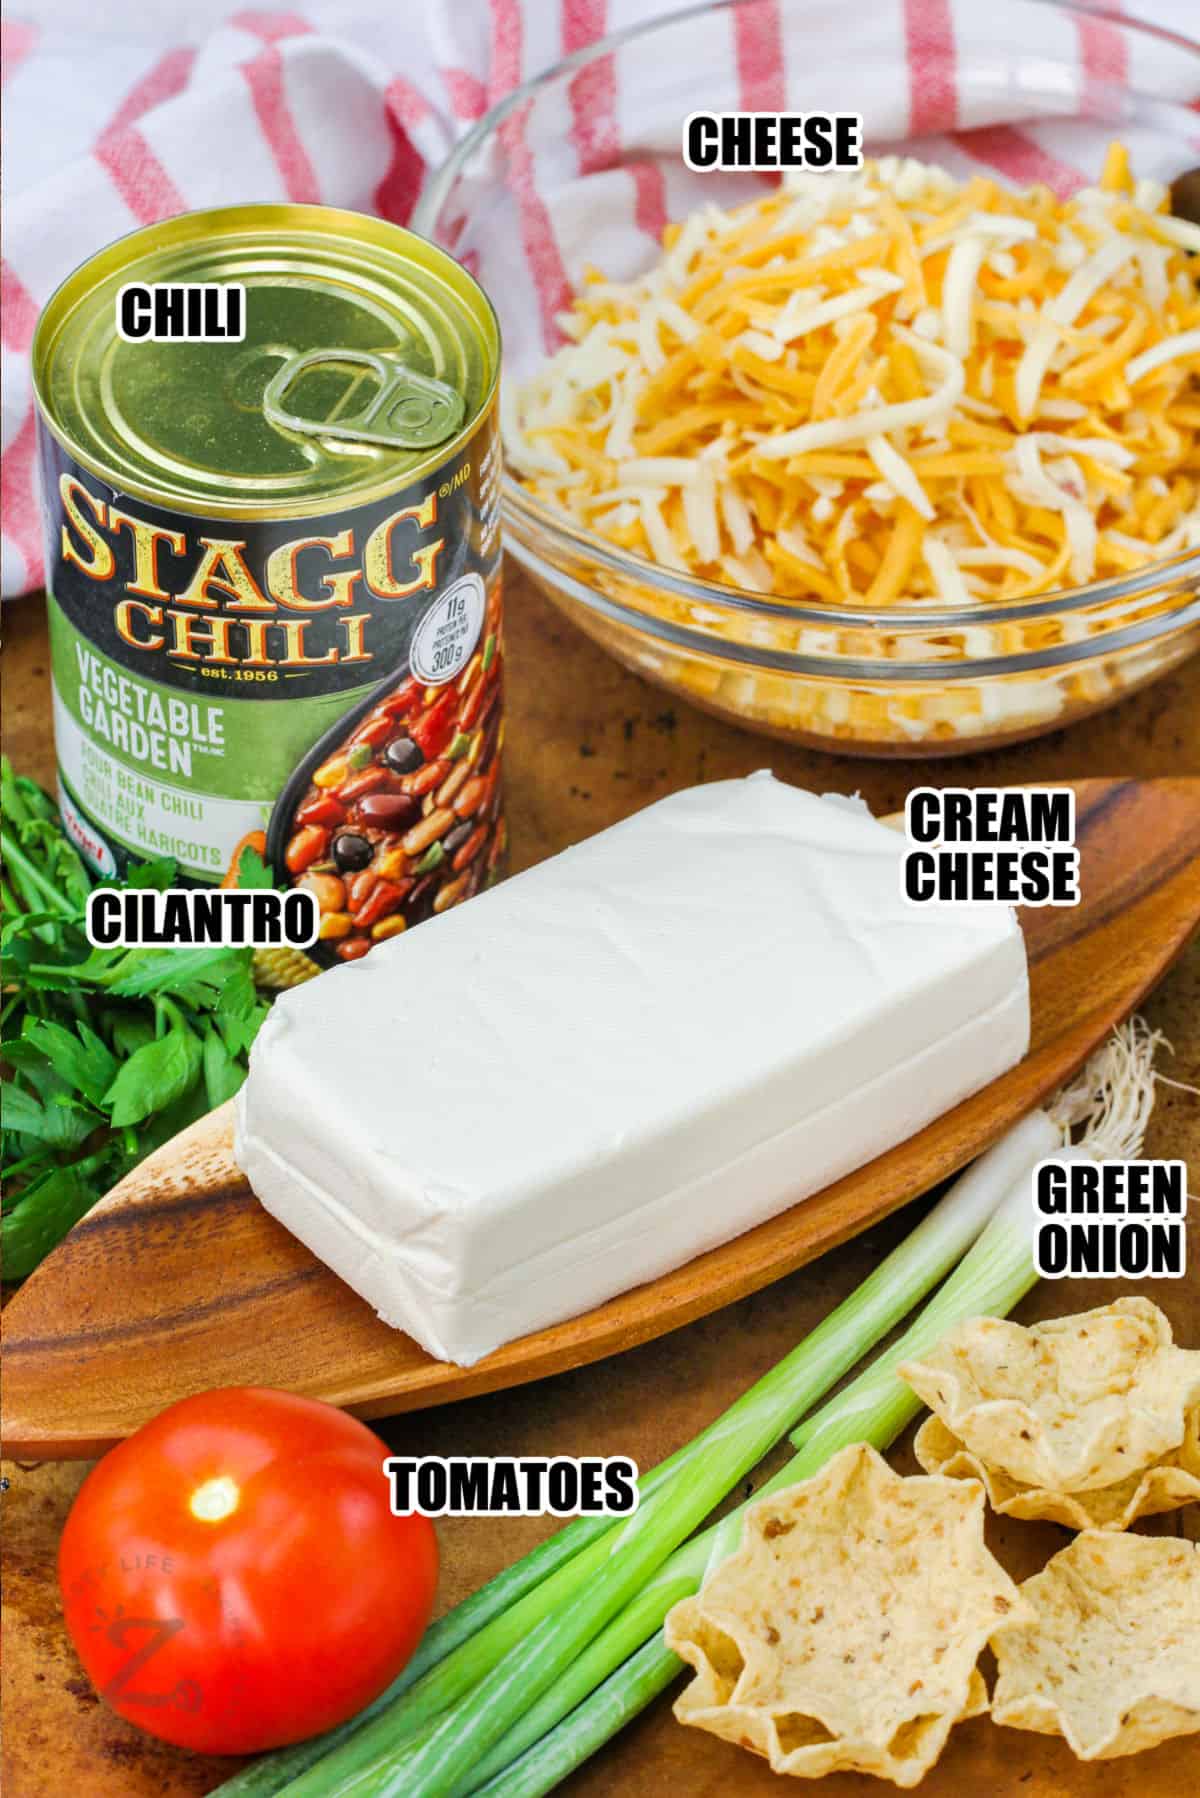 ingredients such as canned chili, shredded cheese, and cream cheese, cilantro, green onion and tomato, used to make Chili Cream Cheese Dip